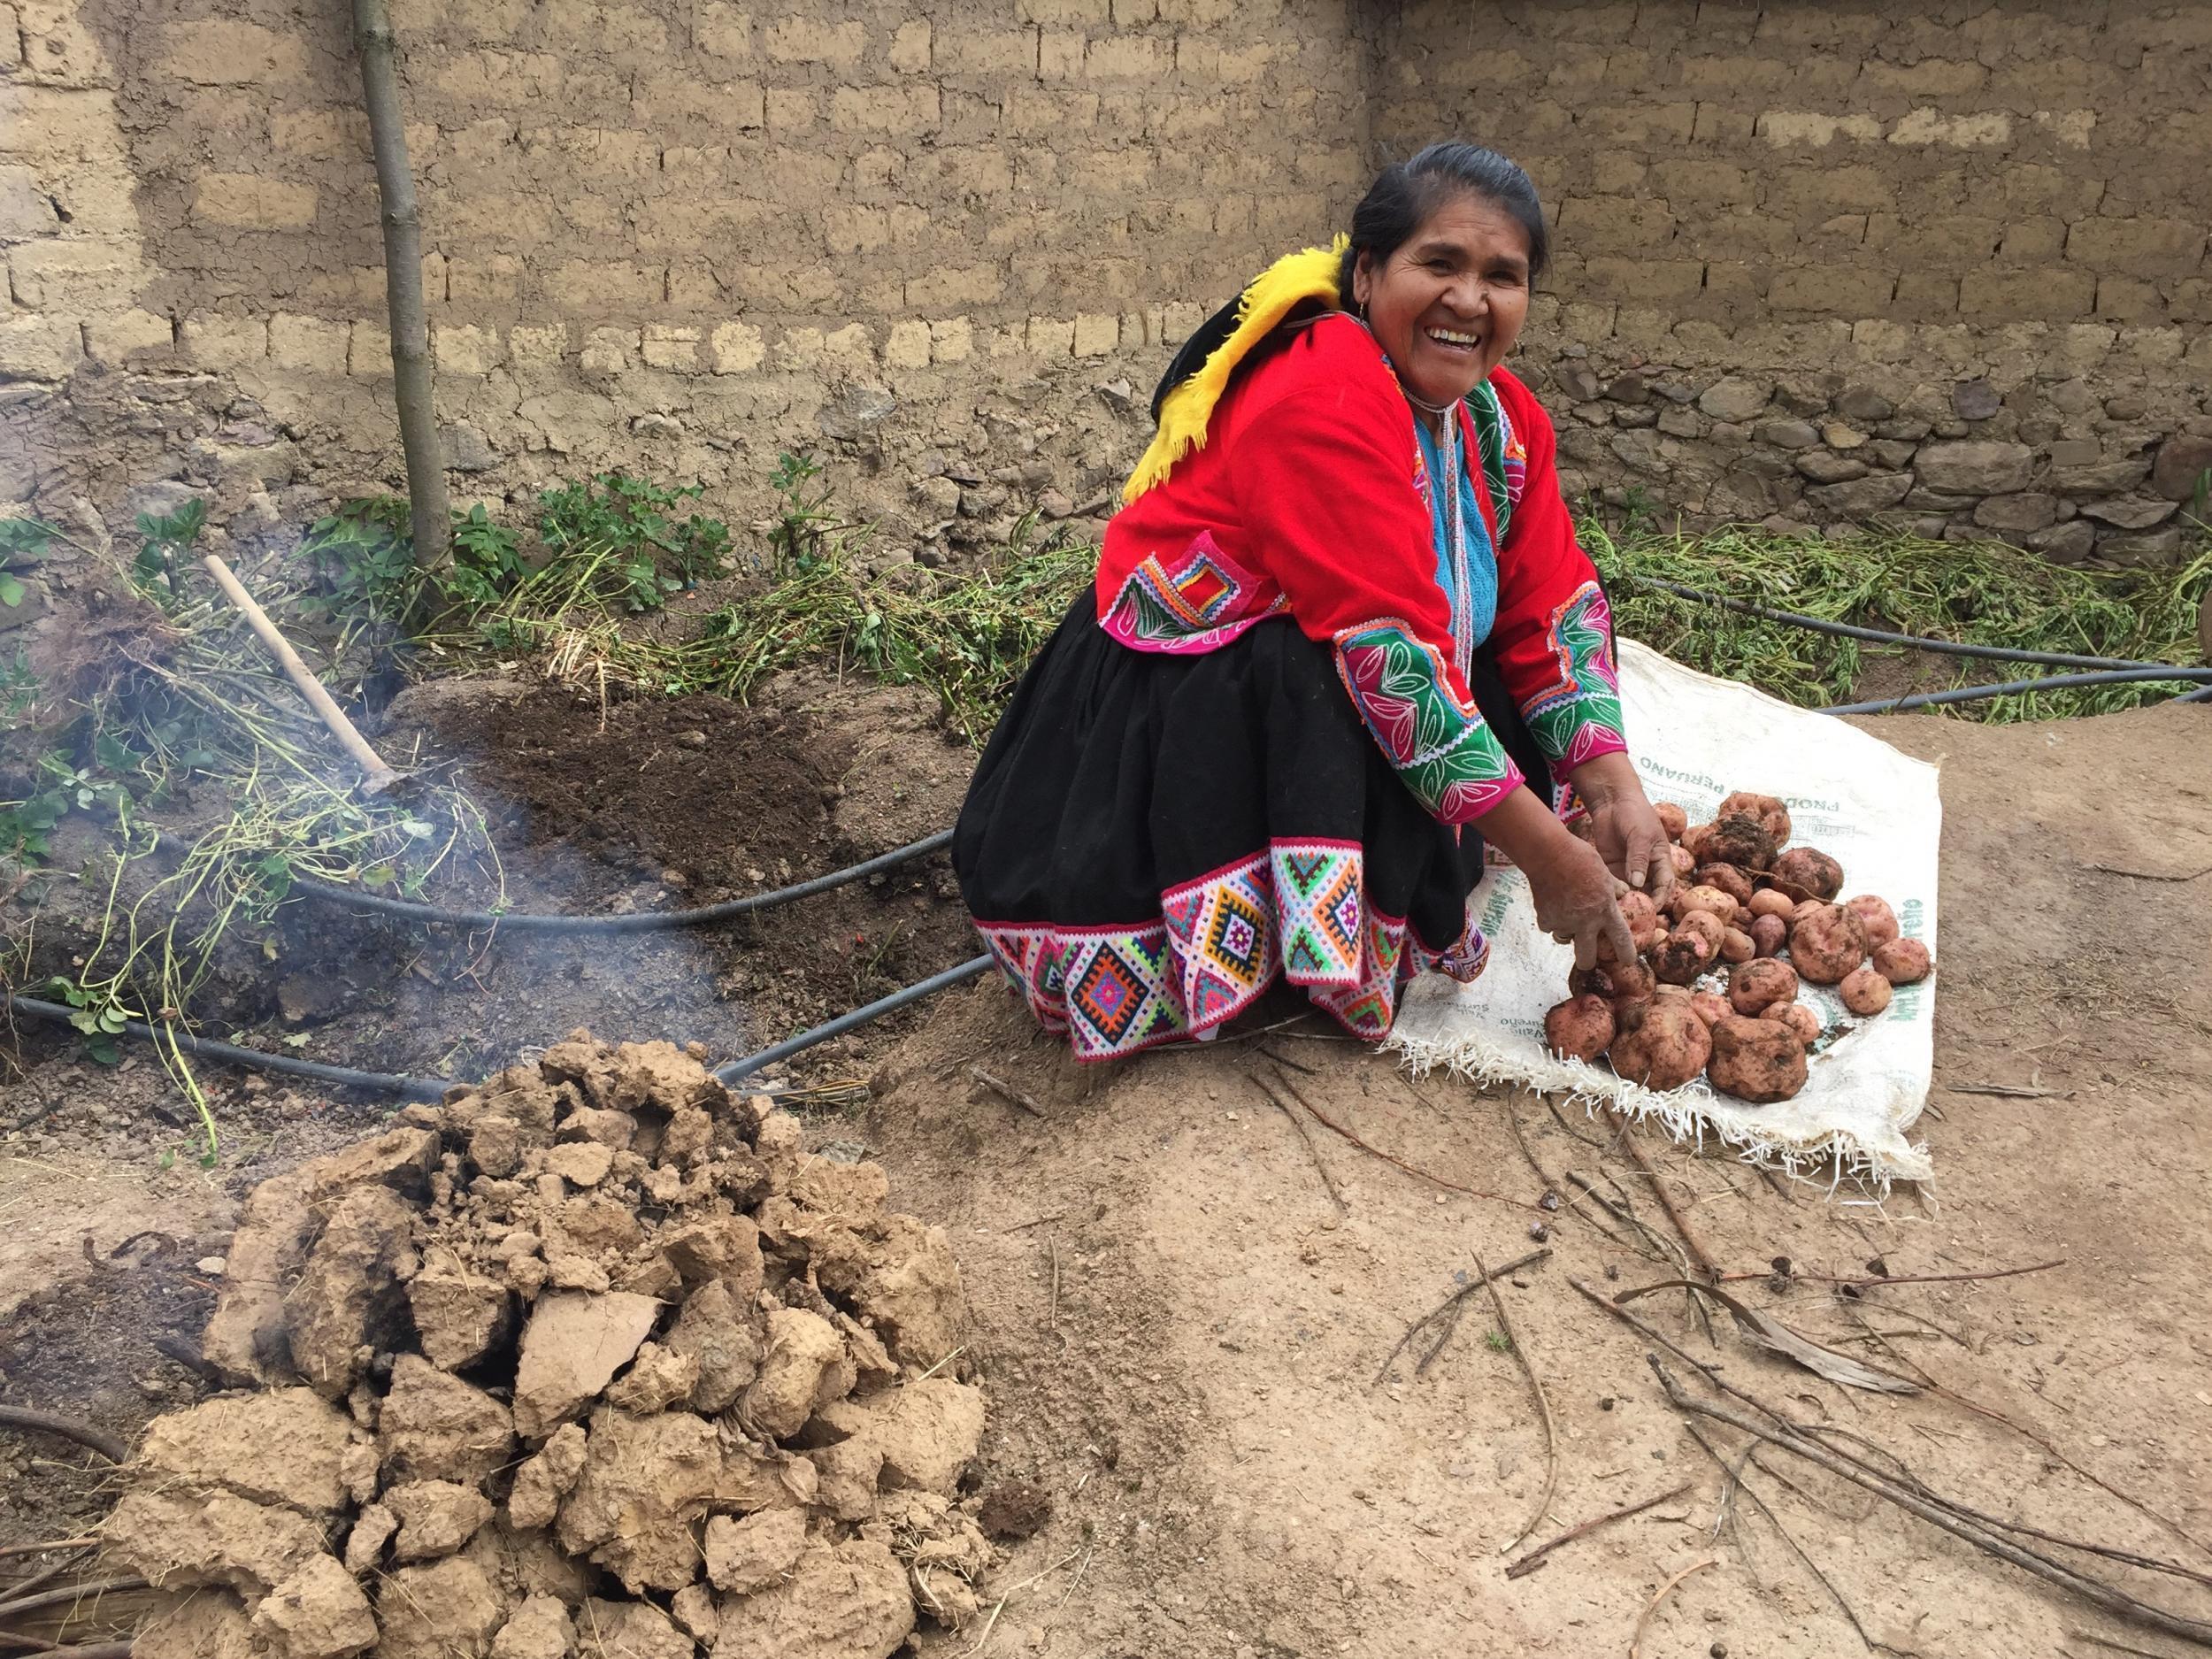 Great bake-off: Potatoes cooked in the traditional Peruvian brick oven